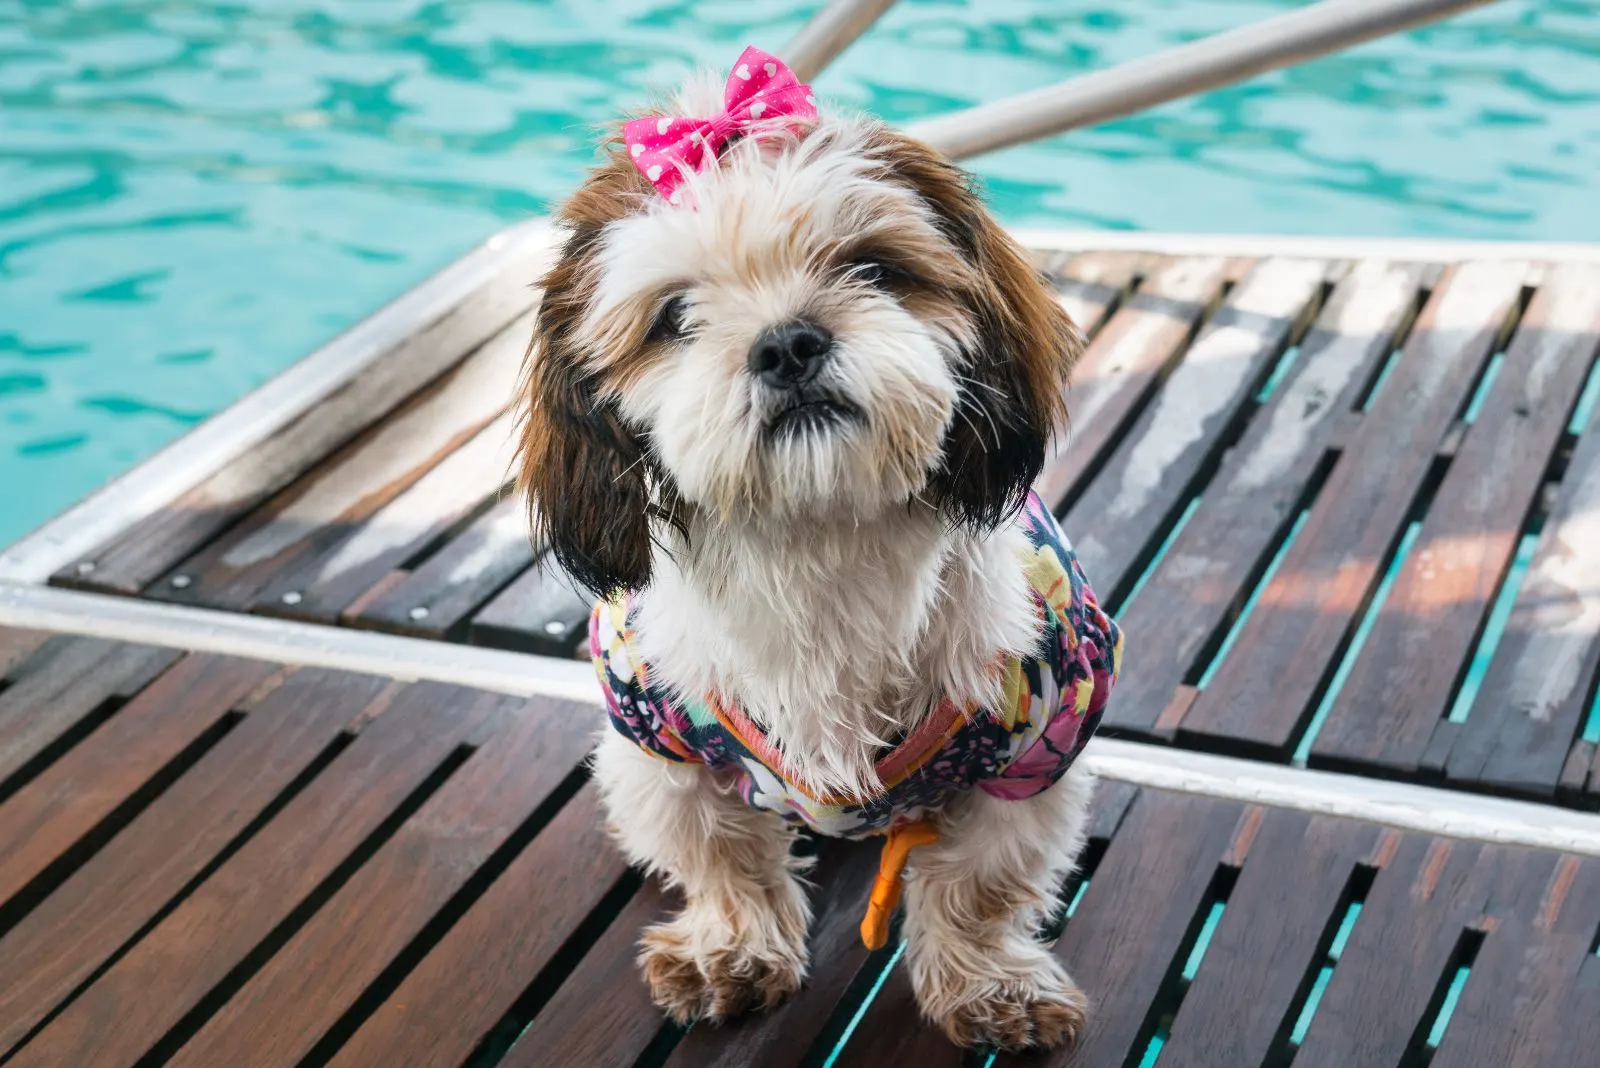 Shih Poo sits on the pier and looks at the camera